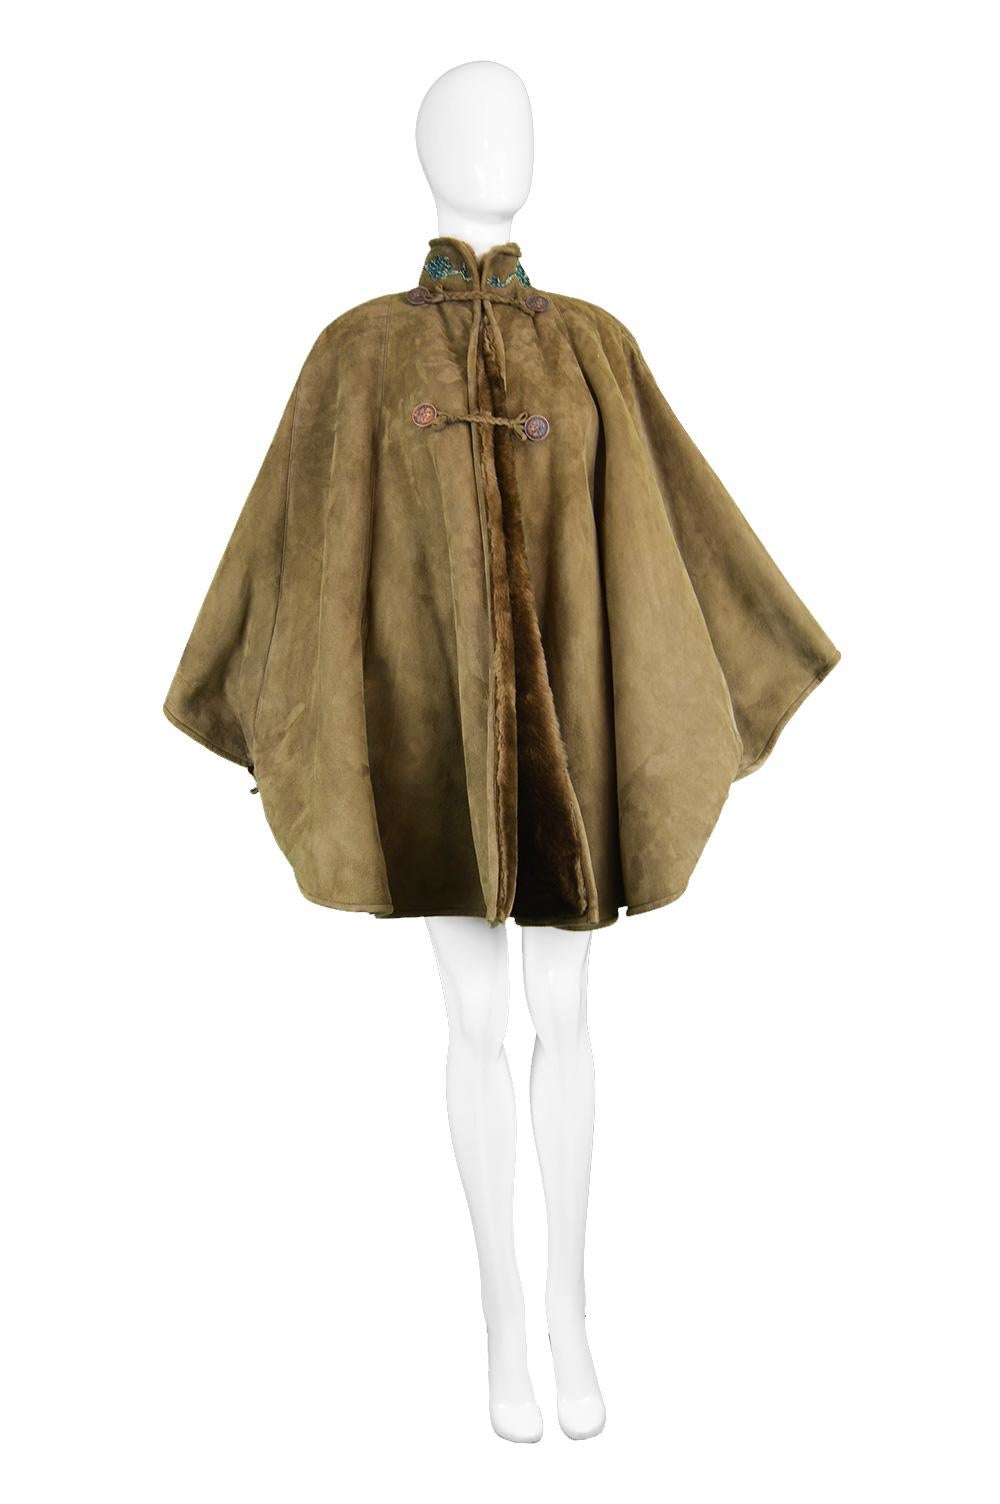 Fendi Embroidered Huge Brown Shearling Sheepskin Suede Cape Coat, 1980s

Size: One size fits all, meant to have a loose fit like all capes. Please see full description by clicking 'Continue Reading' below. 
Bust - Free
Waist - Free
Length (Shoulder